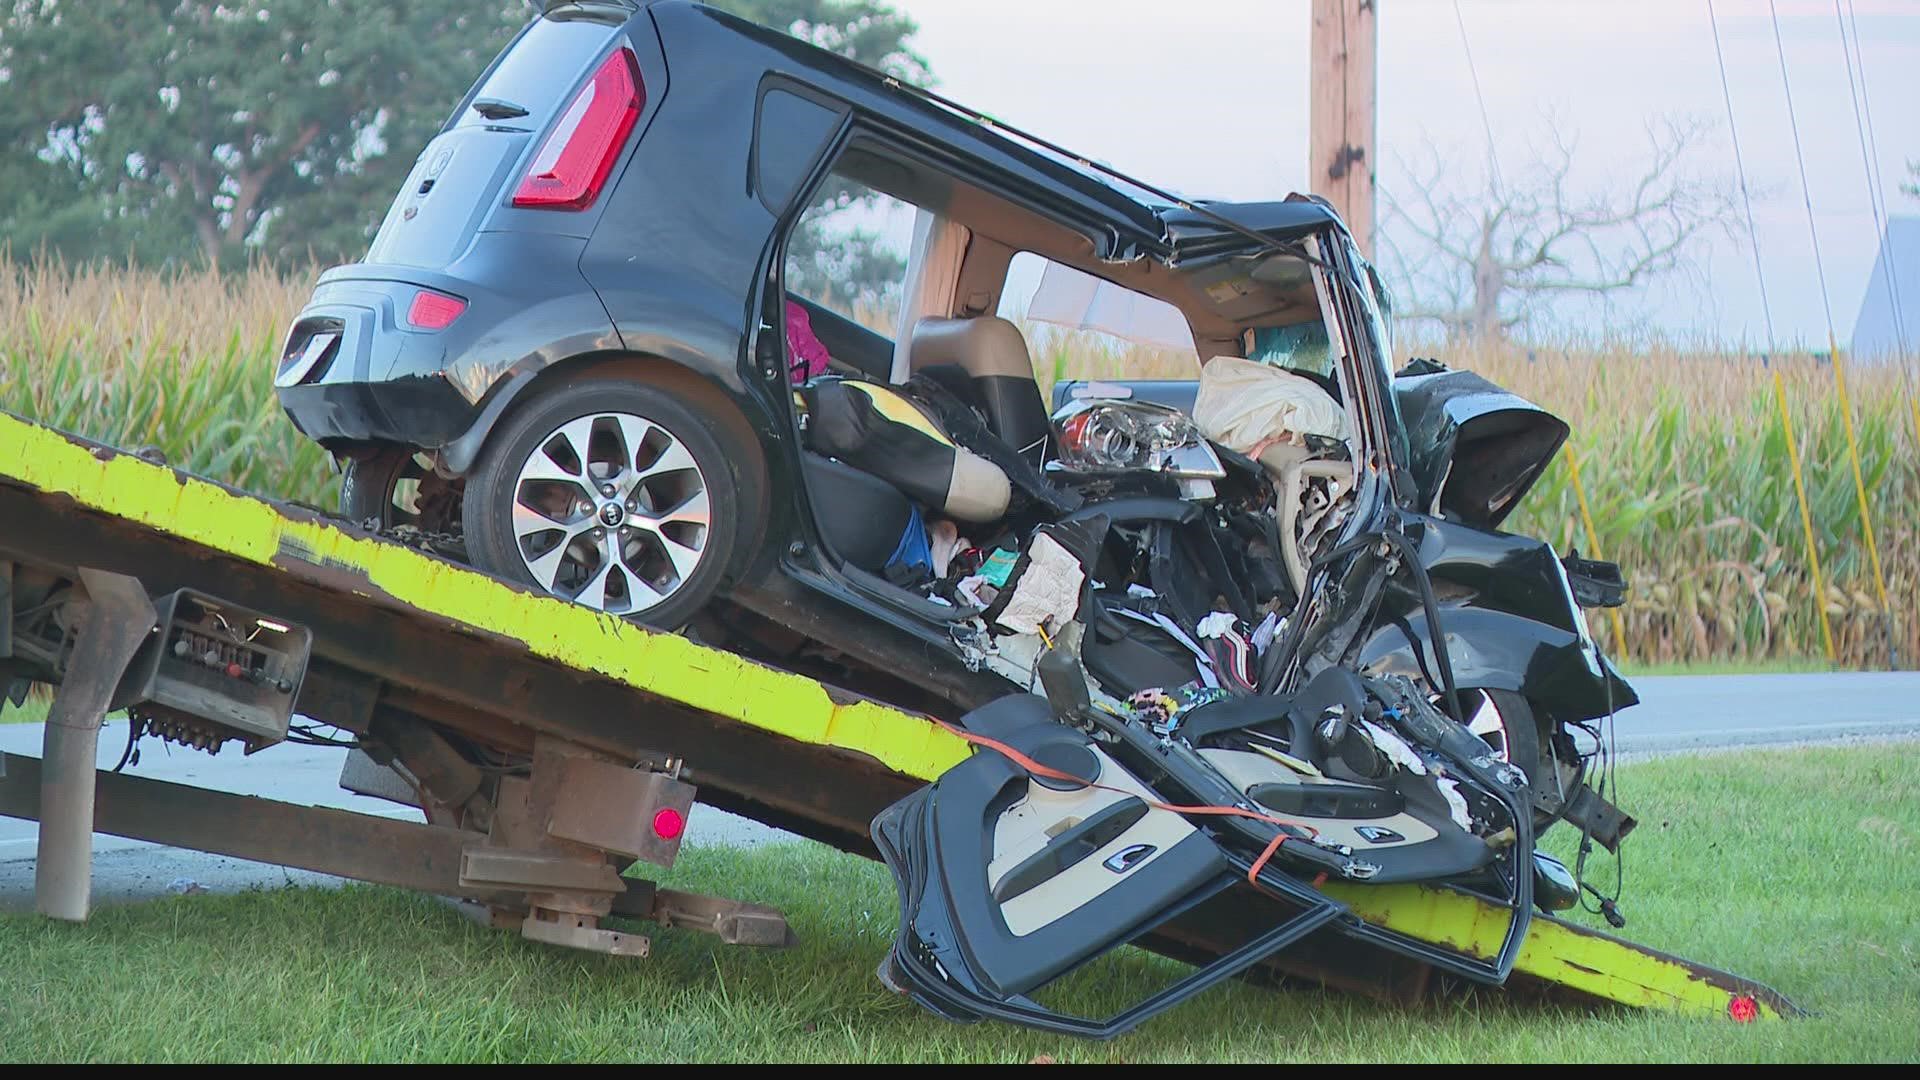 A 14-year-old boy was driving a car full of teenagers when he crashed into a tree in Boone County.